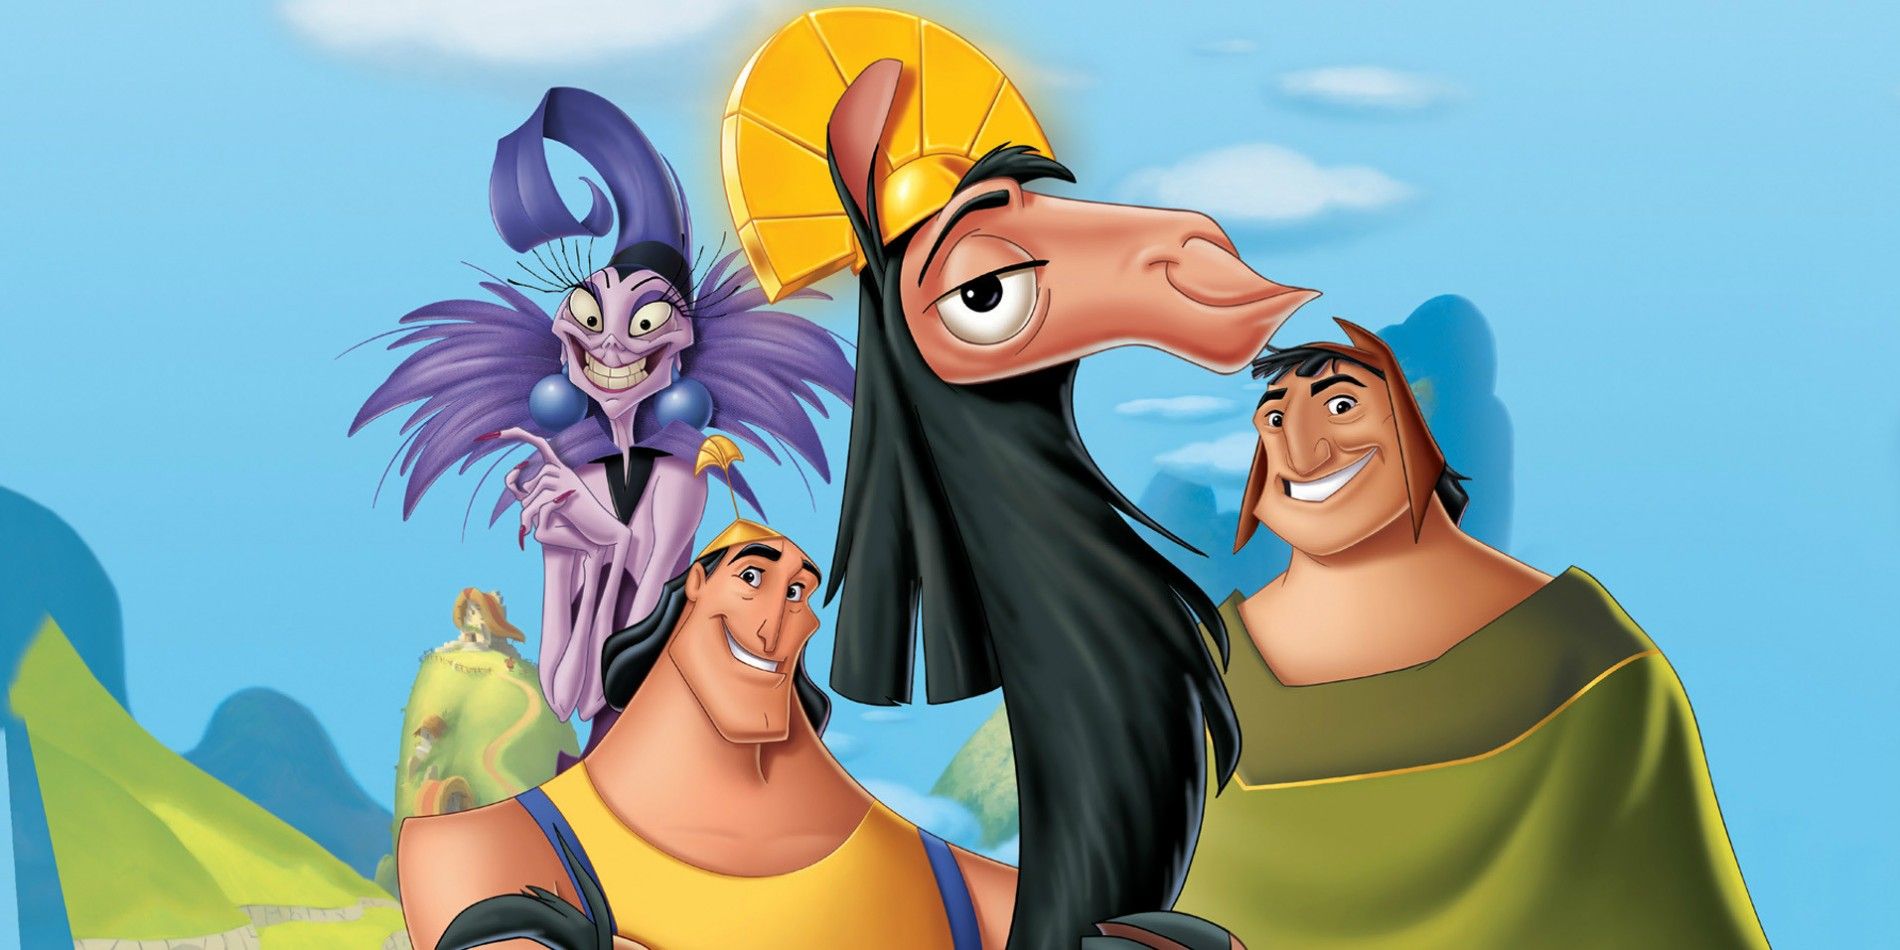 Official Artwork for Emperor's New Groove